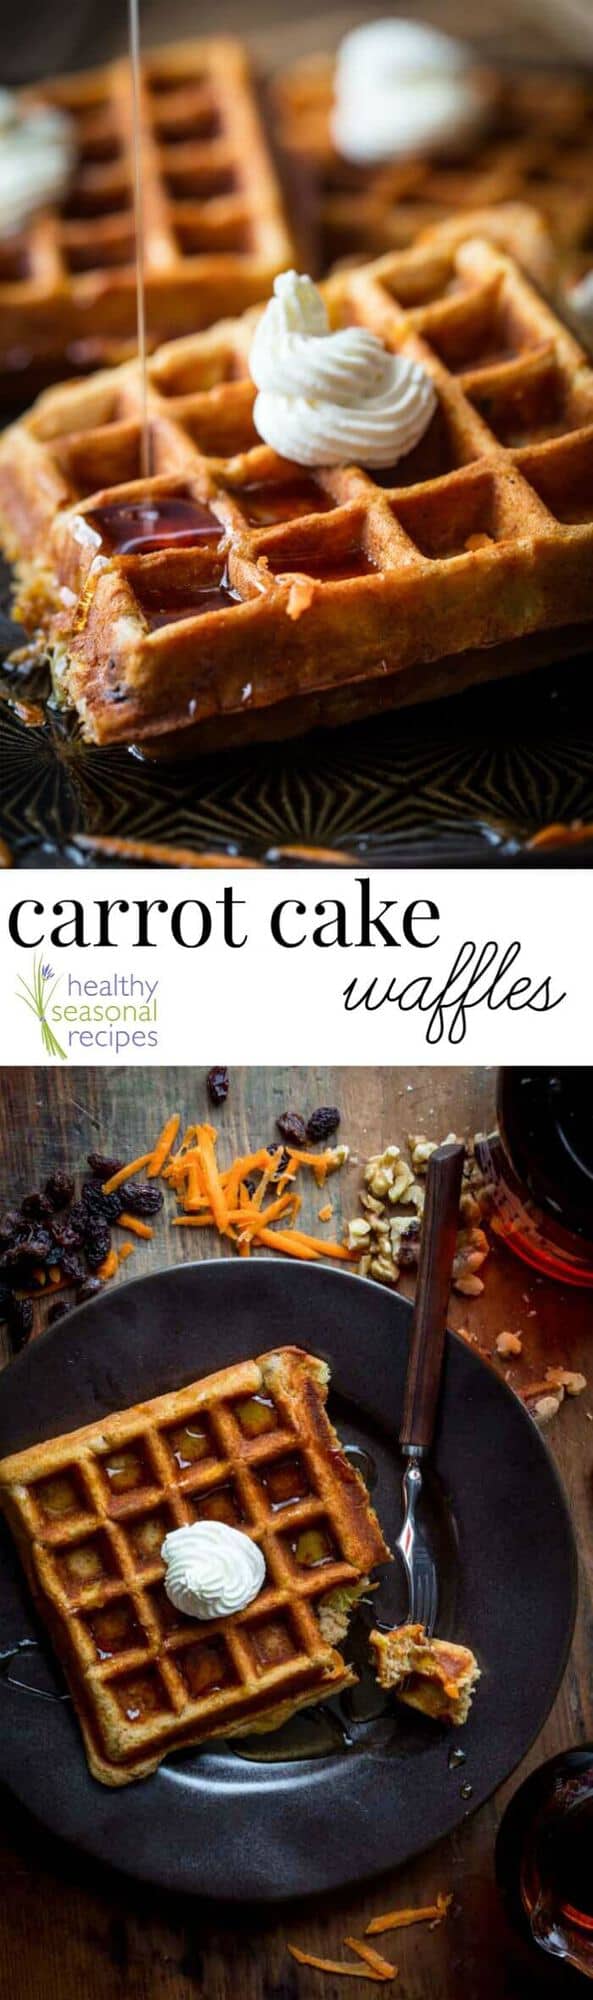 Carrot Cake photo collage with text overlay